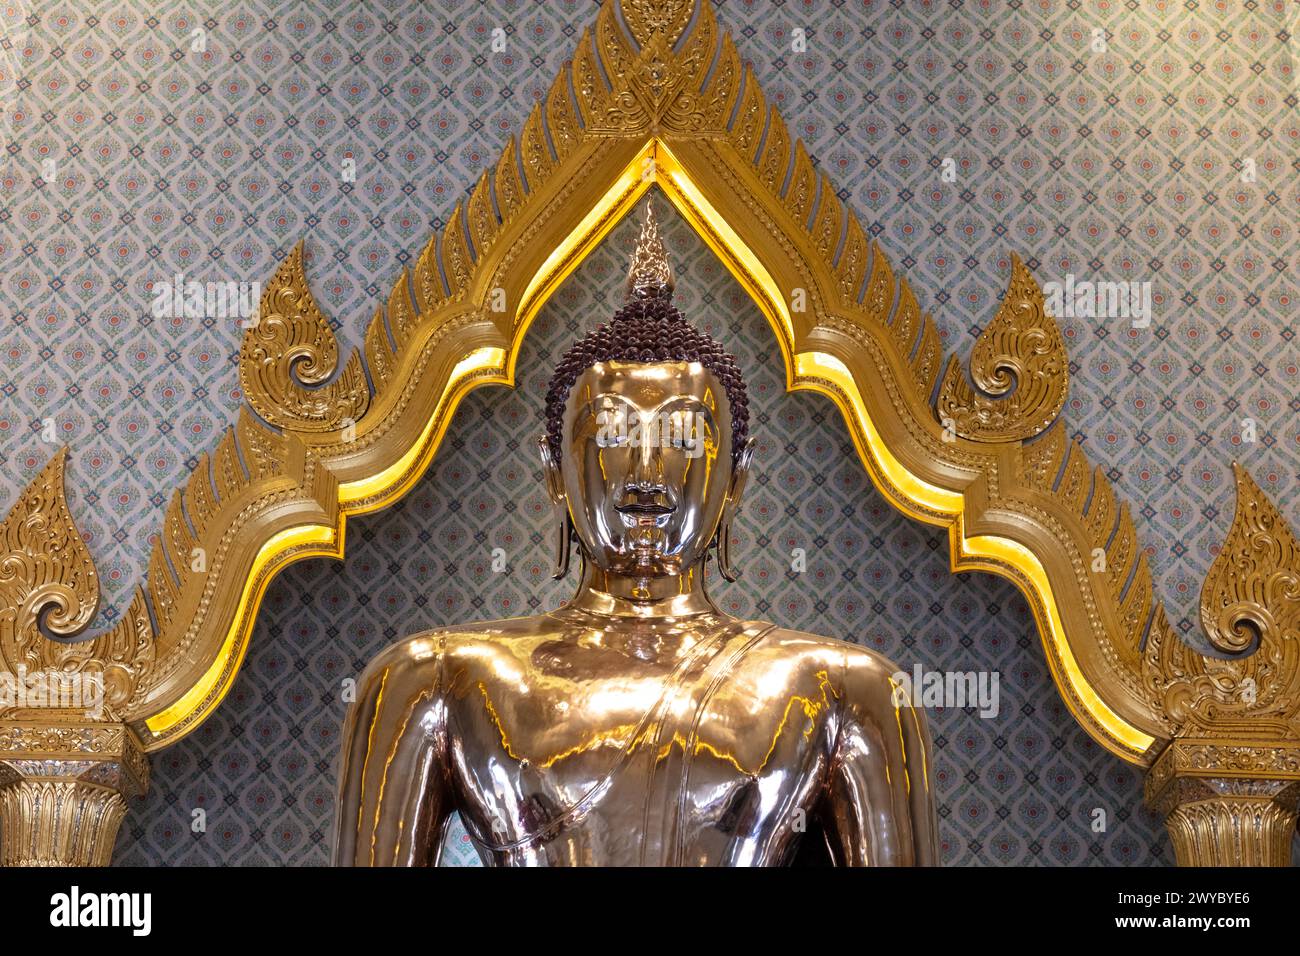 Closeup of solid gold Buddha statue, Wat Traimit (Temple of the Golden Buddha). It is 3 meters (nearly 10 feet) tall, and weighs 5.5 tons. Stock Photo